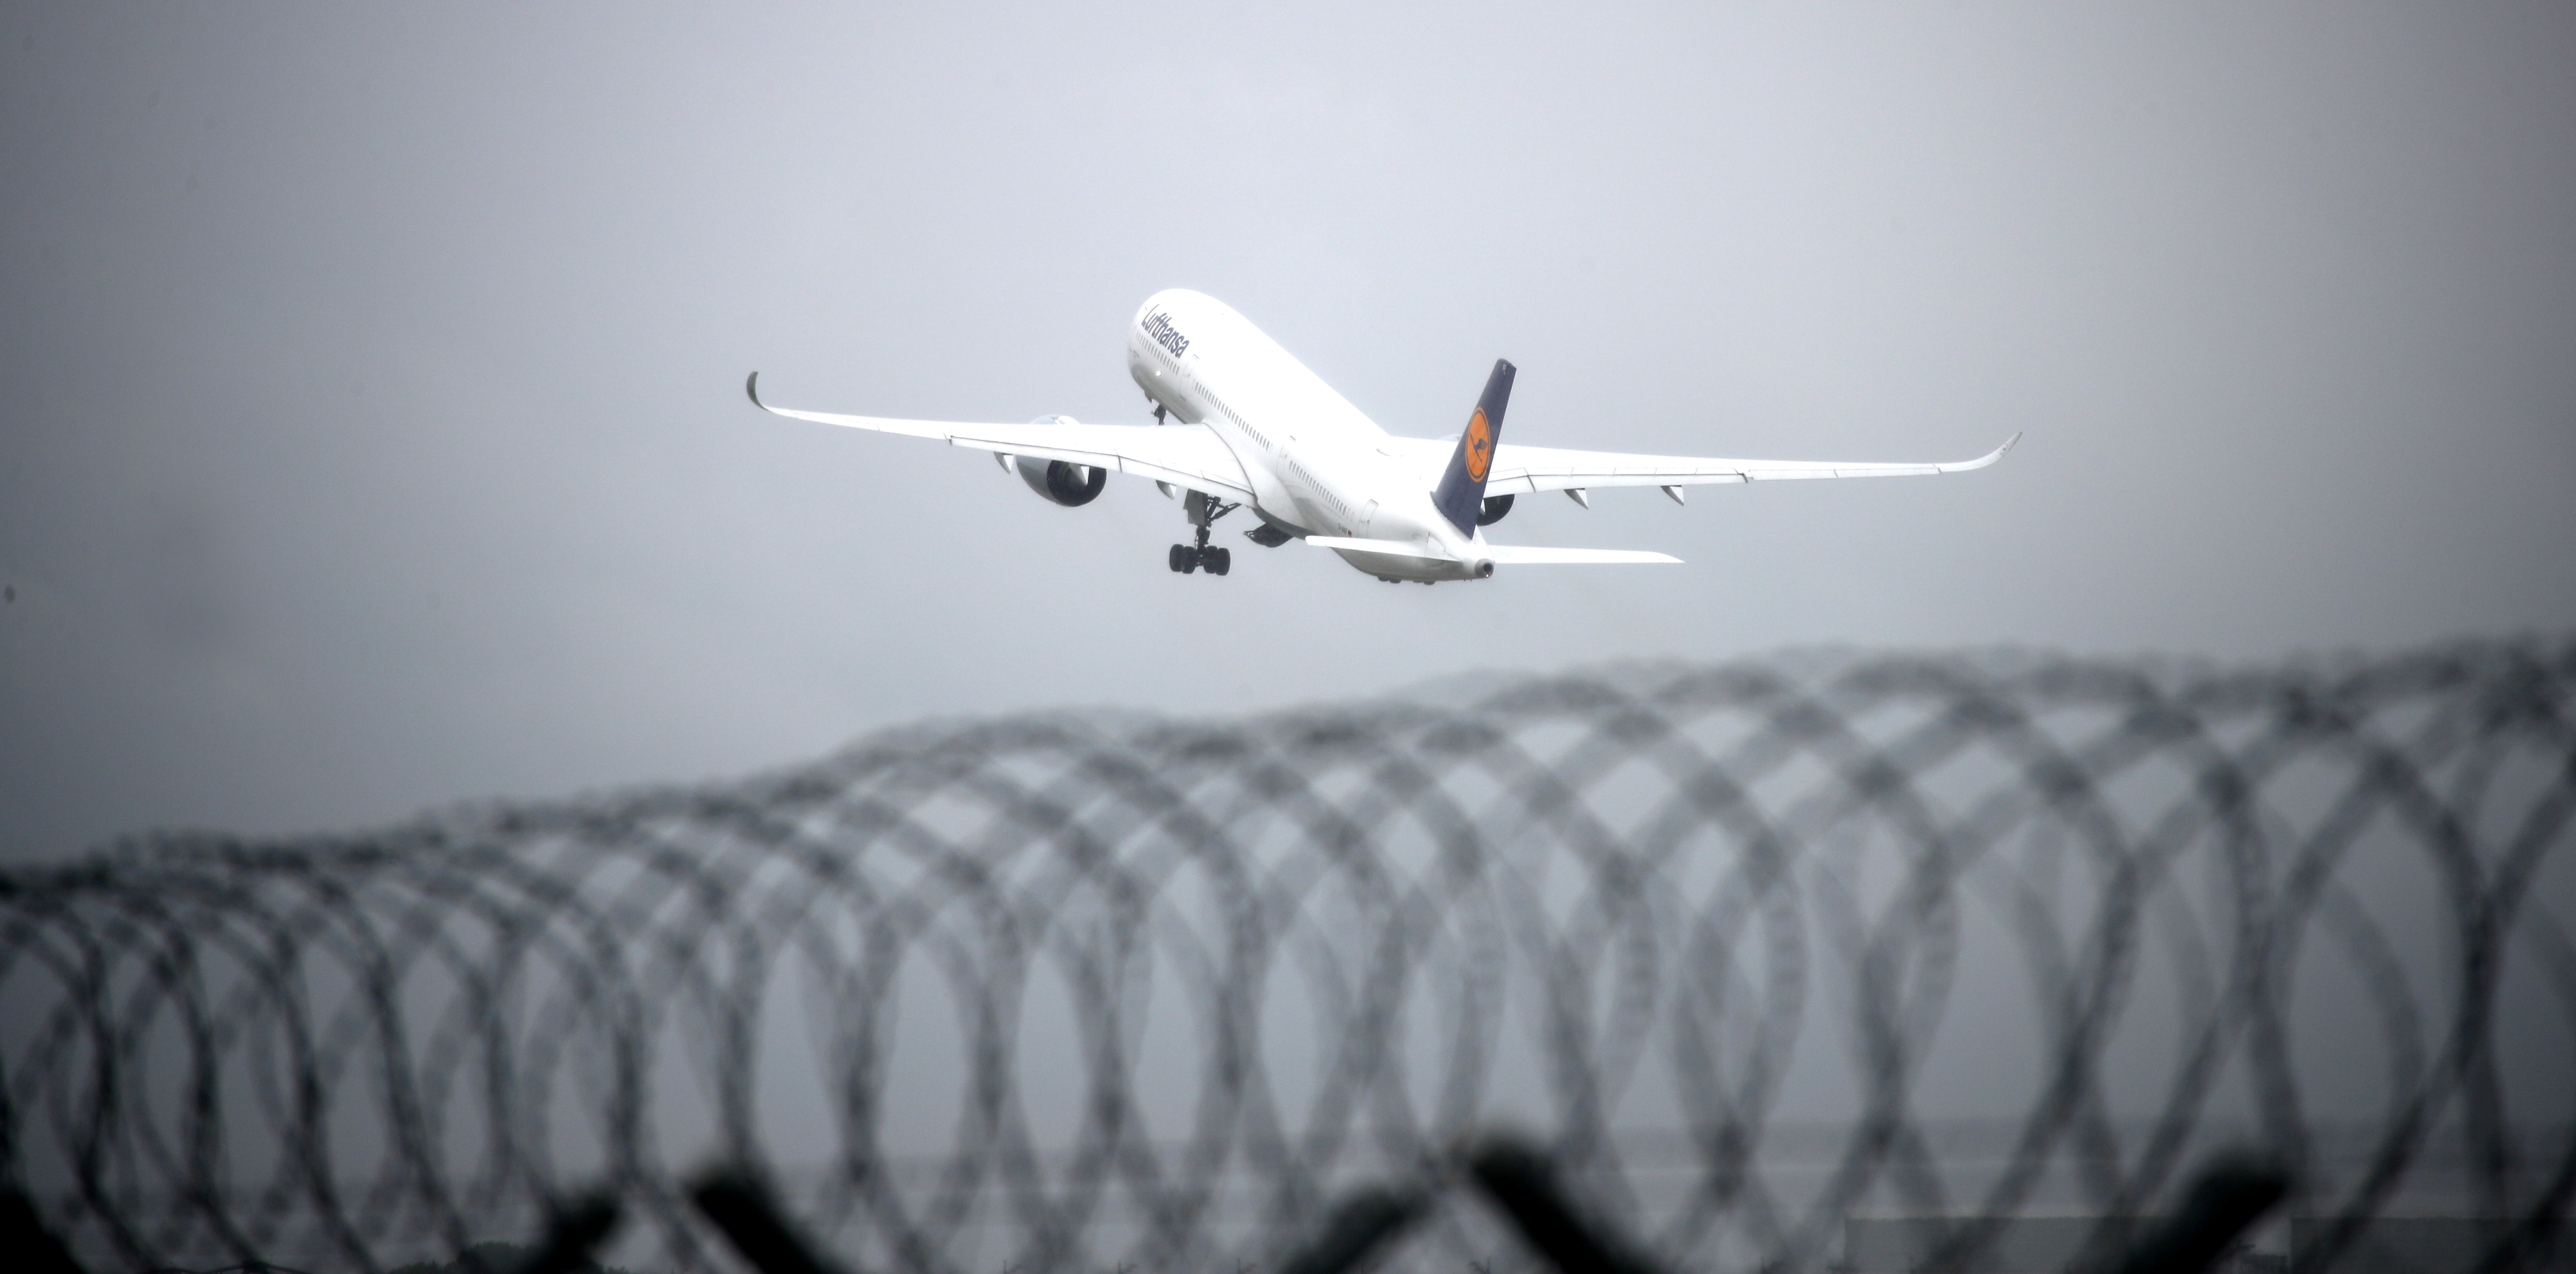 An Airplane of German carrier Lufthansa takes off from Munich International Airport